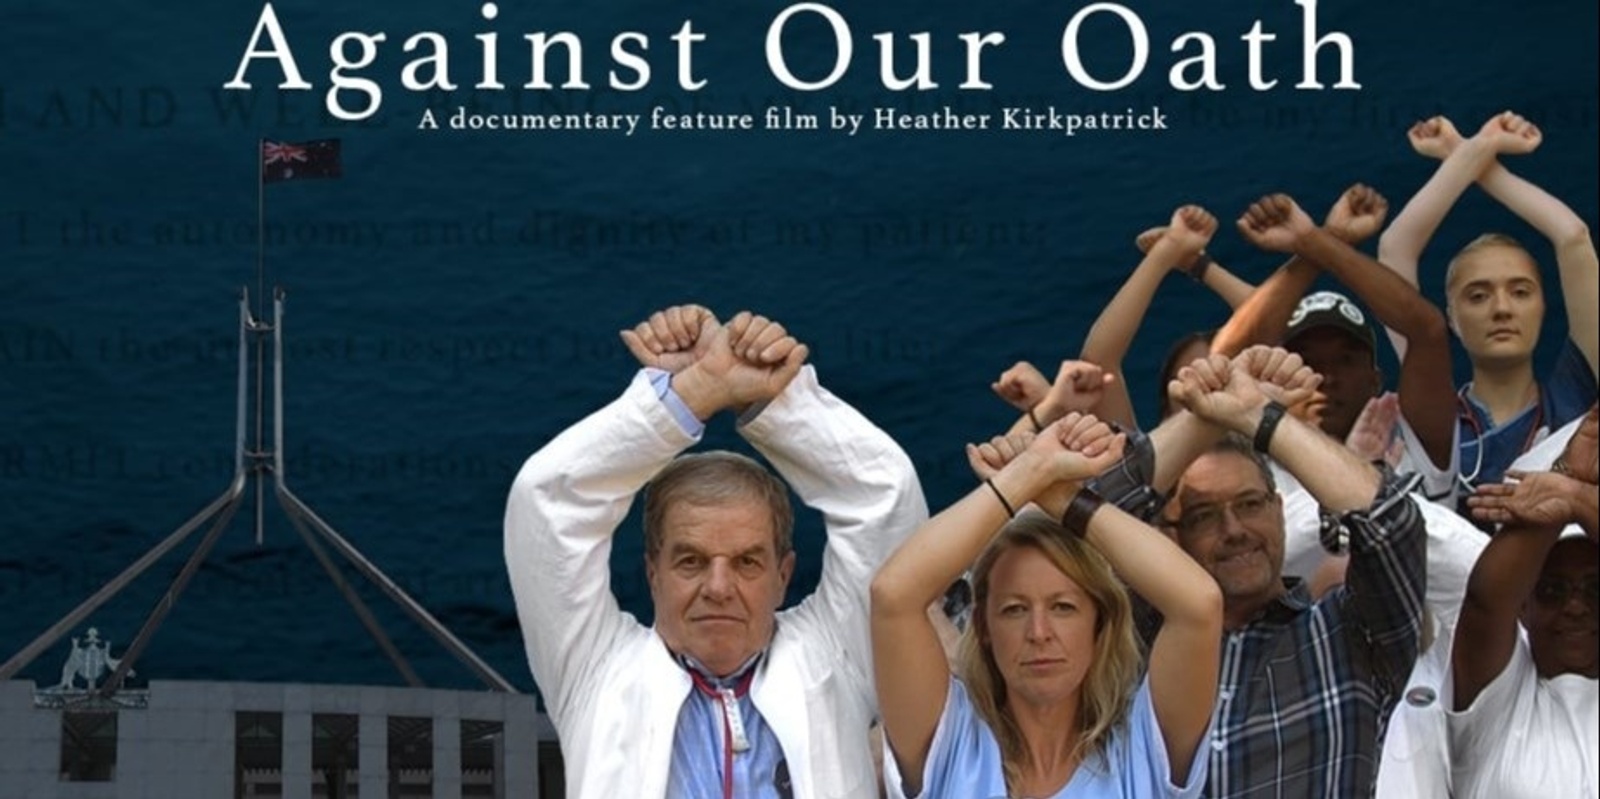 Banner image for Queensland Premiere: "Against Our Oath" - film screening Noosa Cinema + Q&A with Director